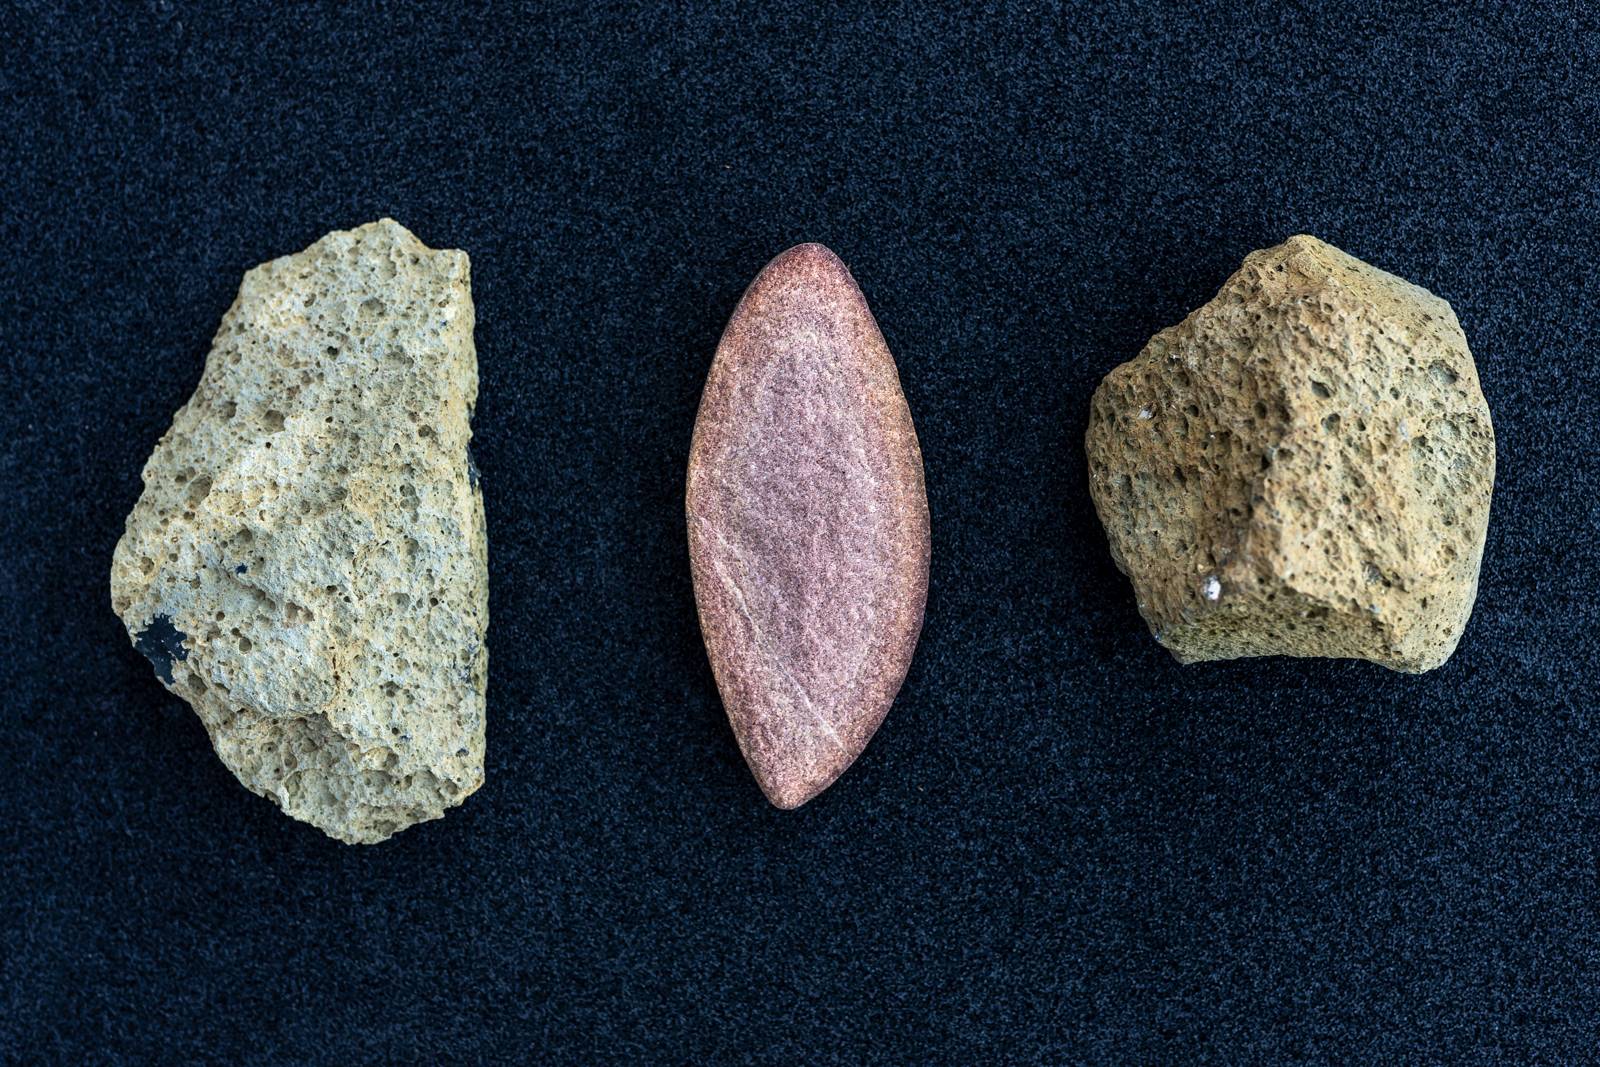 The photo depicts two lithic artefacts and a clast of quartzite found in the oldest loess and palaeosol sediment layer of the archaeological site of Korolevo in Transcarpathia, Ukraine.